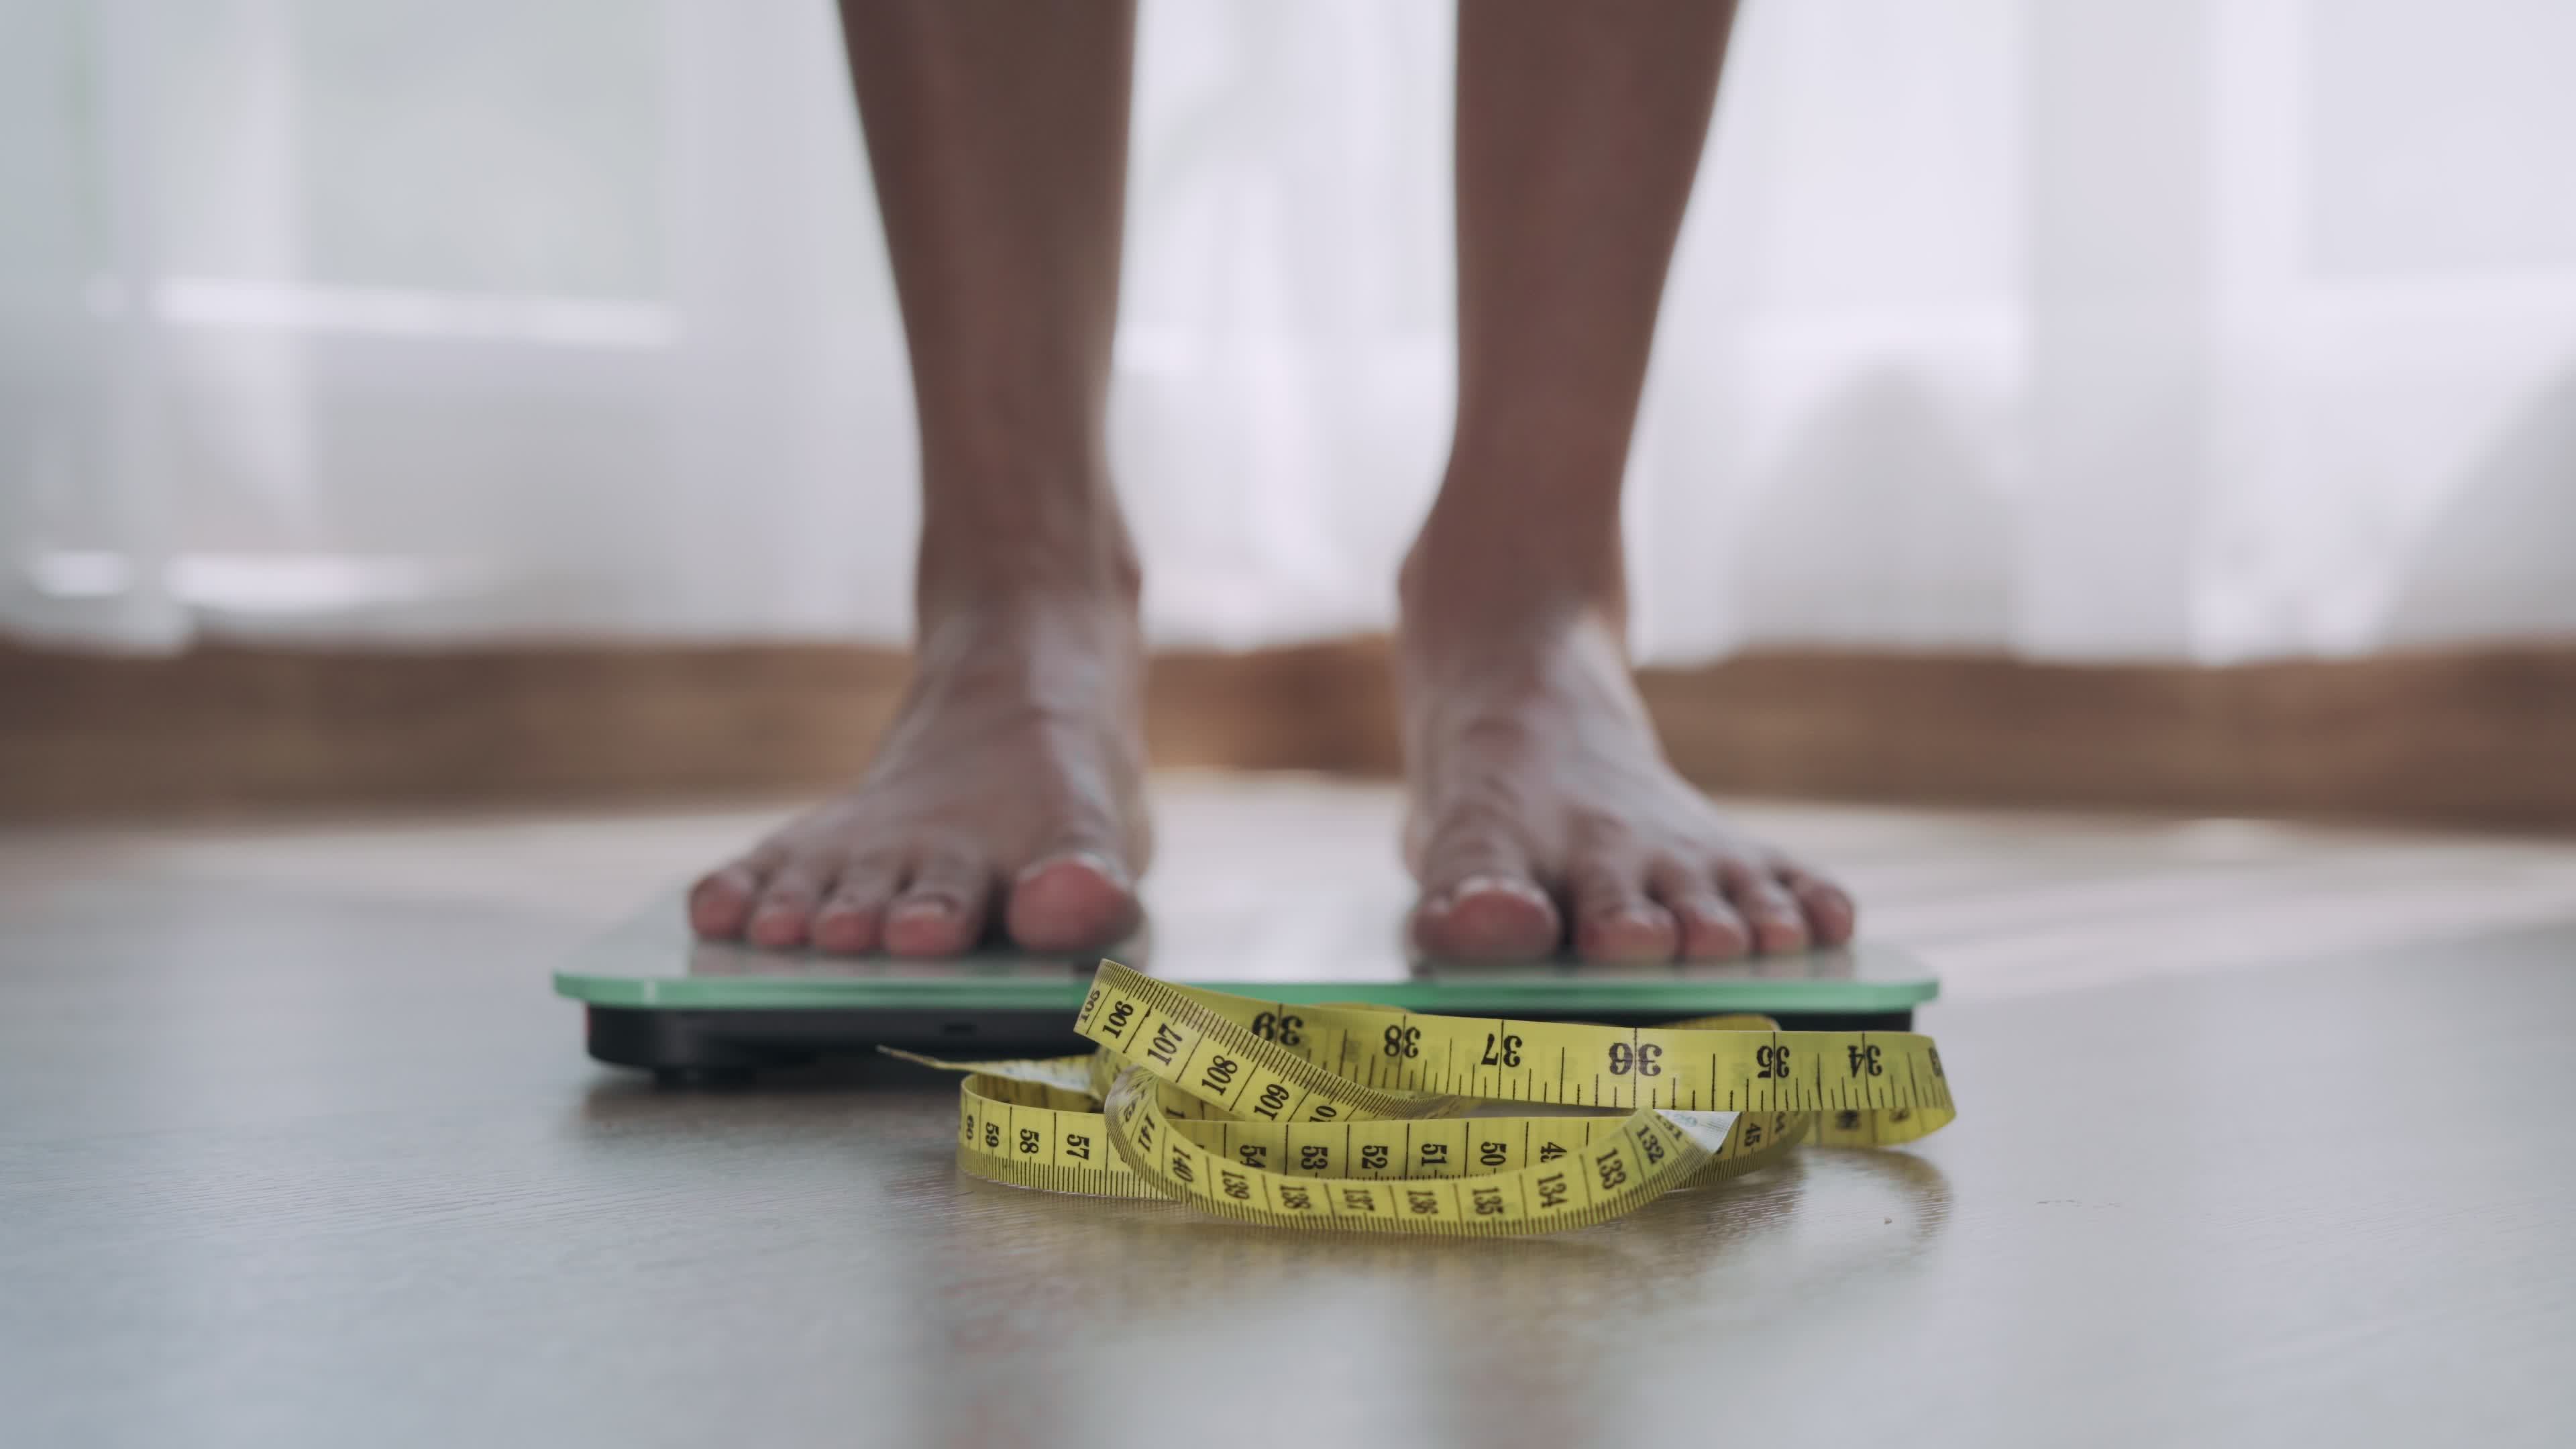 https://static.vecteezy.com/system/resources/thumbnails/016/884/484/original/woman-foot-stepping-on-weigh-scales-with-tape-measure-a-woman-is-weighing-herself-after-eating-food-woman-serious-about-weight-because-need-diet-diet-concept-and-loss-weight-free-video.jpg